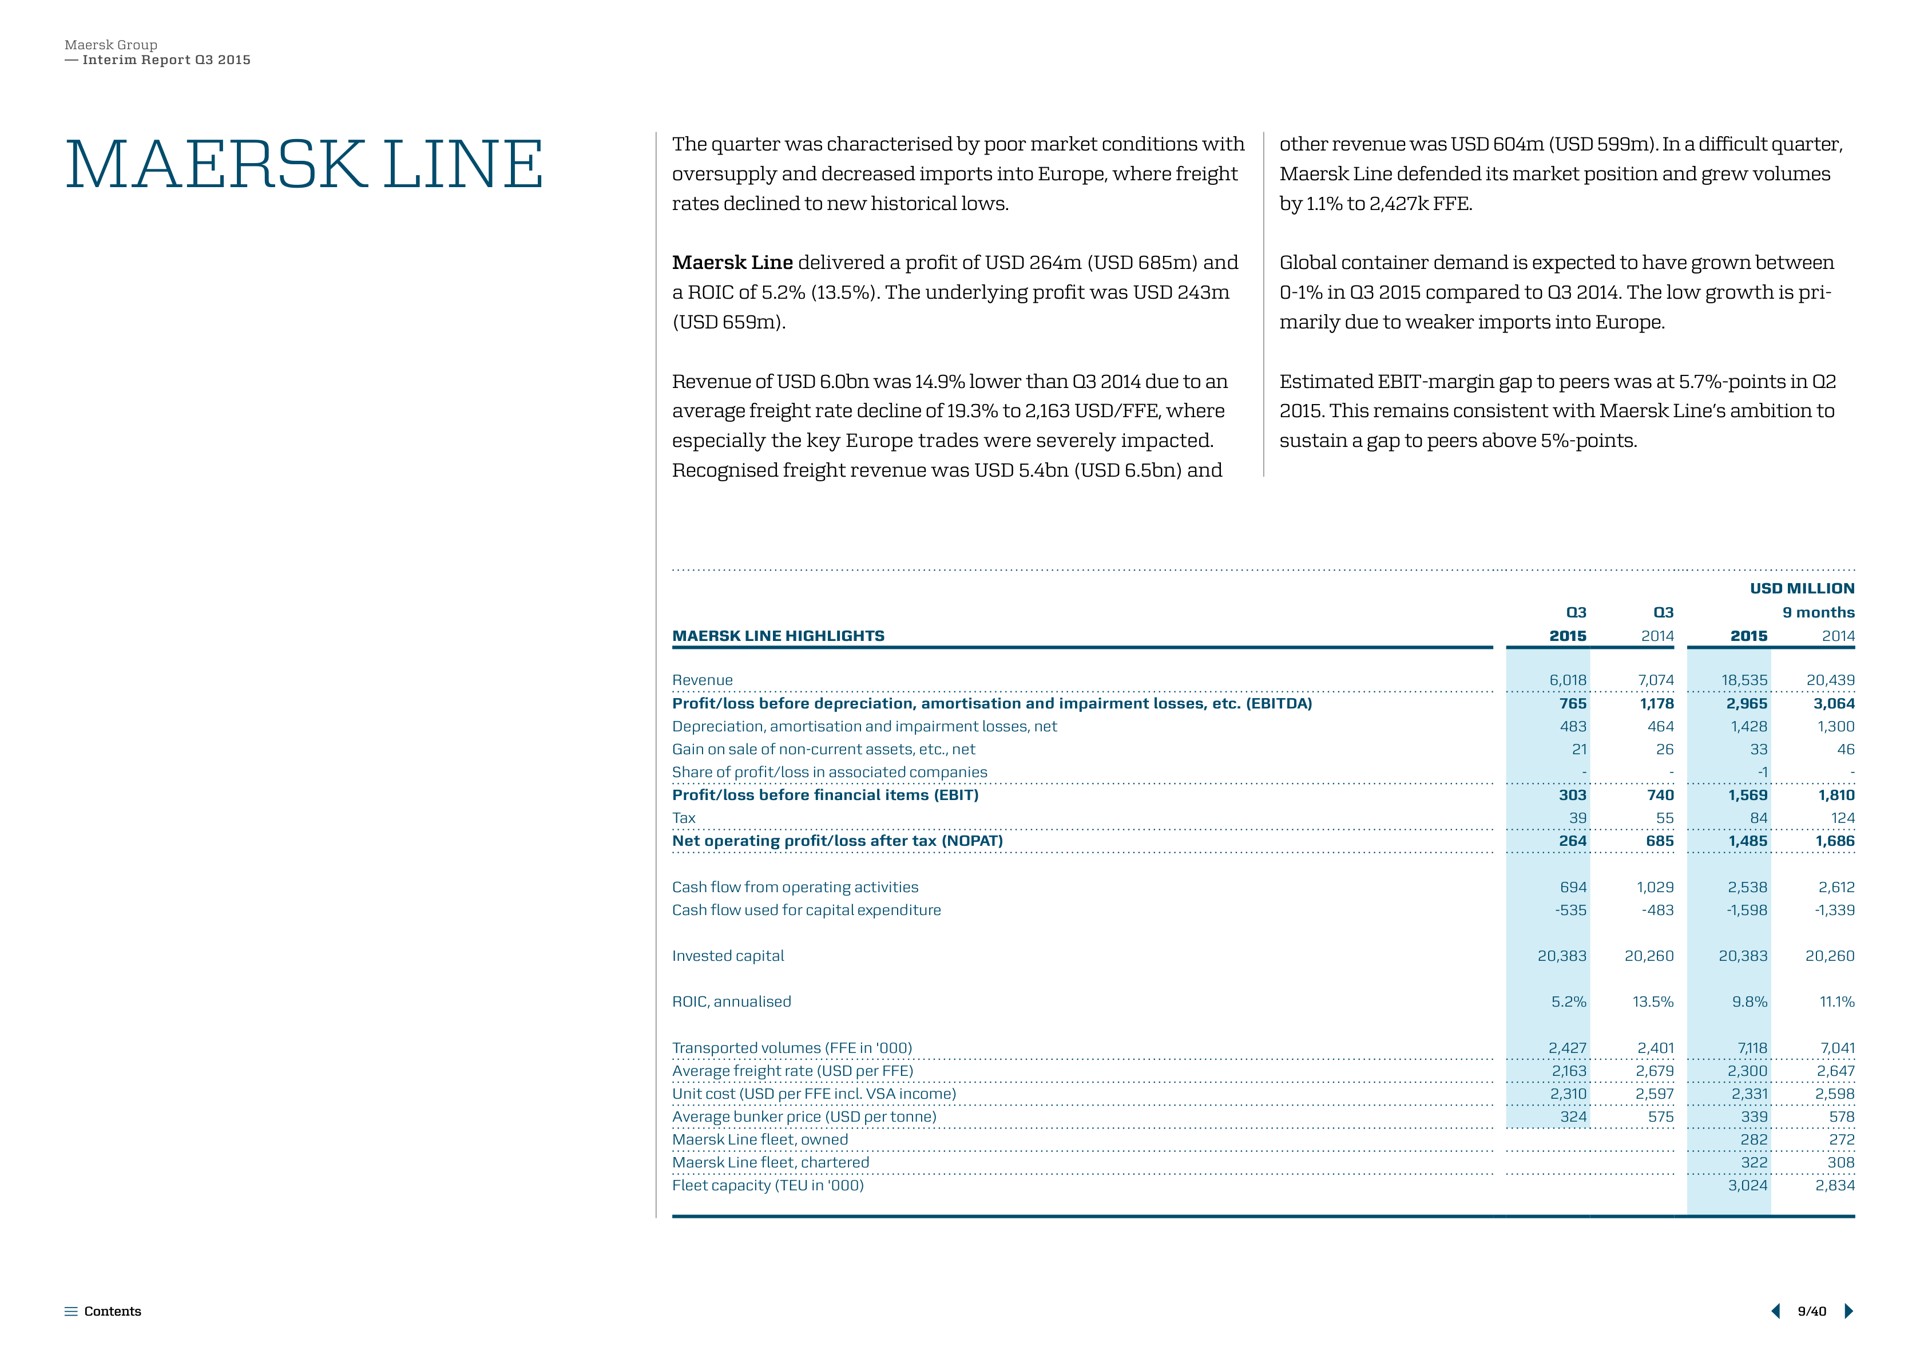 line defended its market position and grew volumes by to global container demand is expected to have grown between due to imports into revenue of was lower than due to an average freight rate decline of to where this remains consistent with ambition to | Maersk